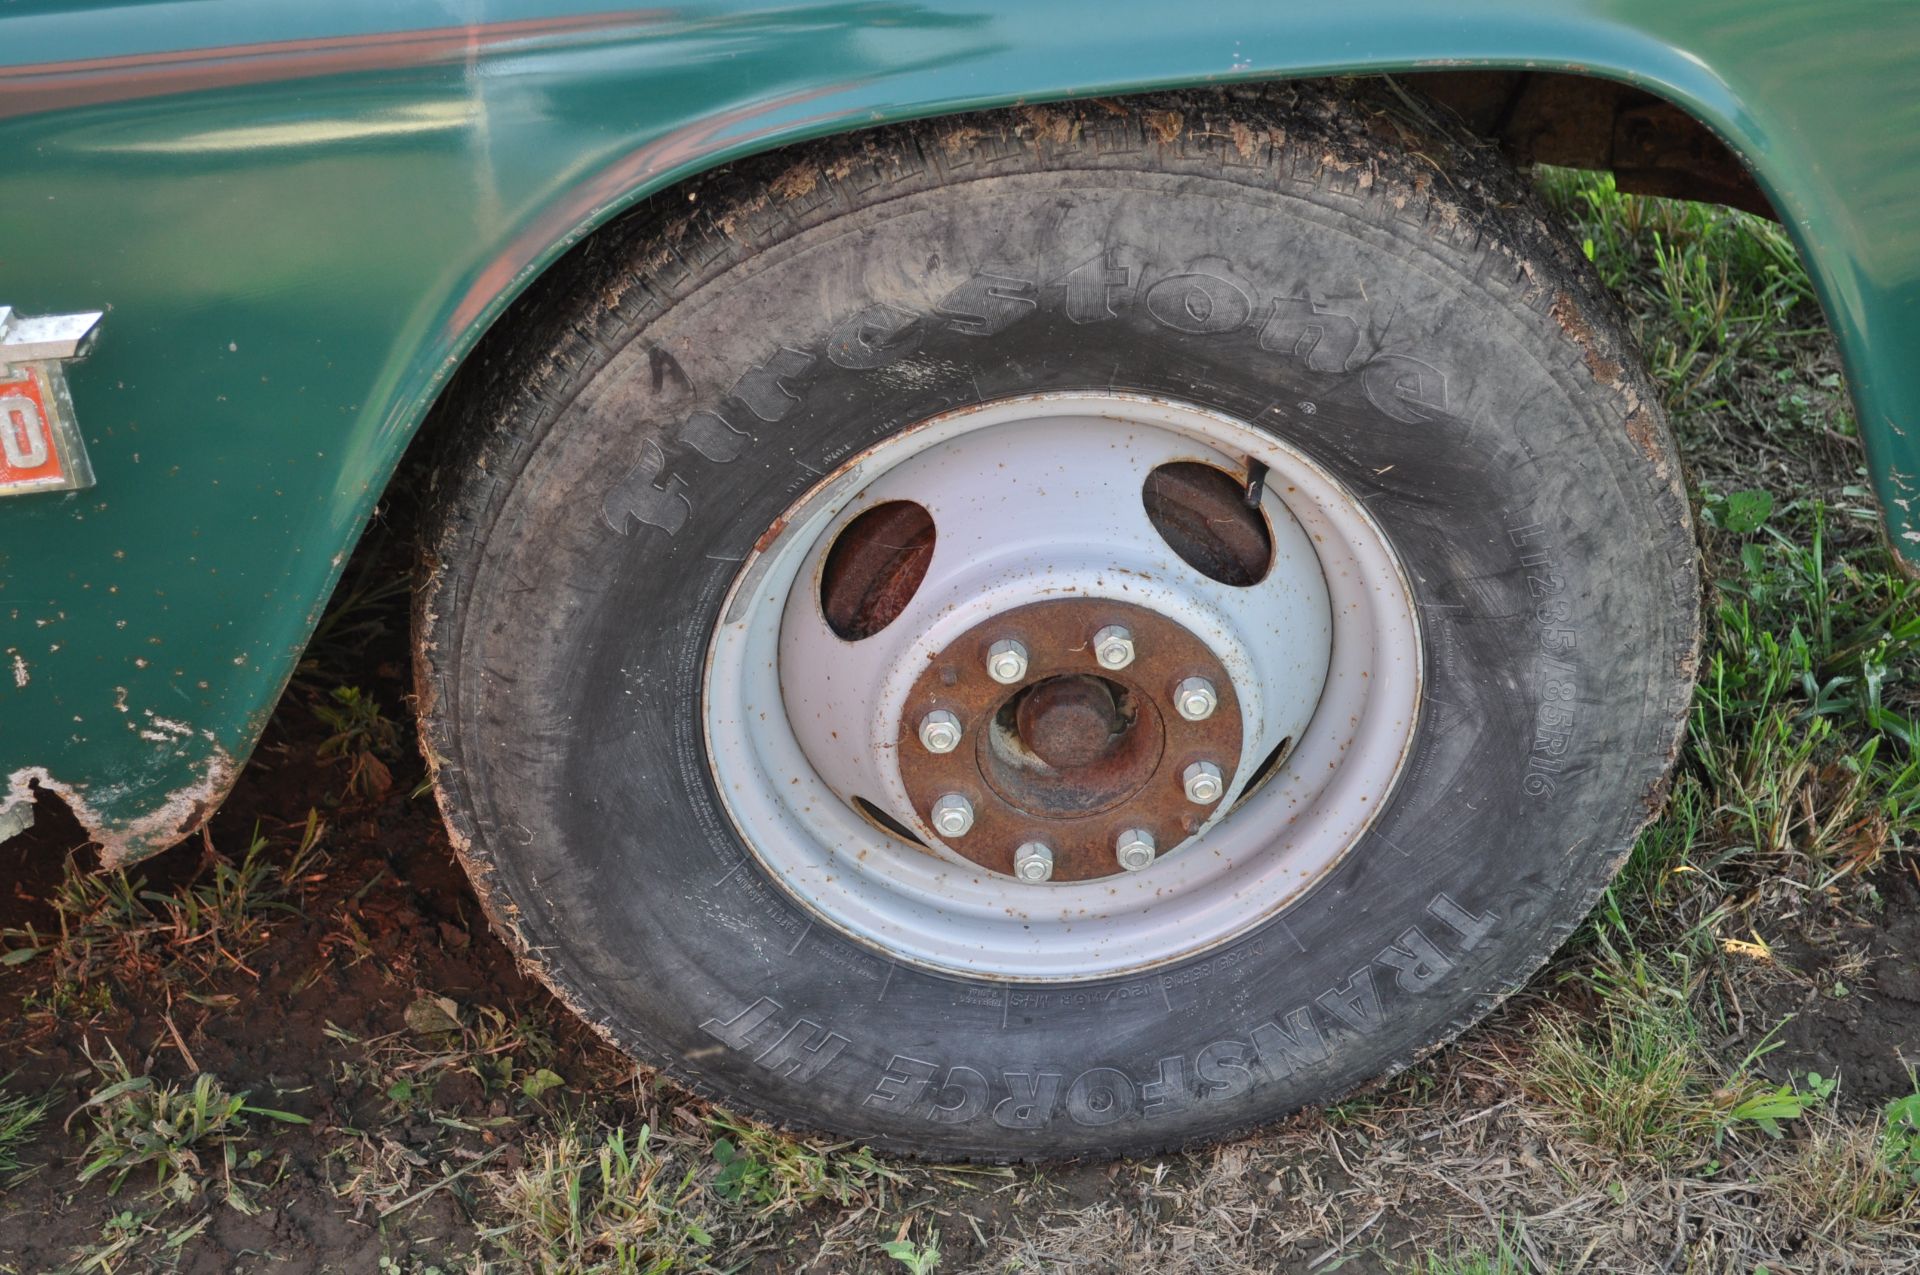 1964 Chevrolet 30 1 ton truck, 230 6 cyl gas engine, 4 spd manual trans, 134” WB, 235/85R16 tires - Image 10 of 20